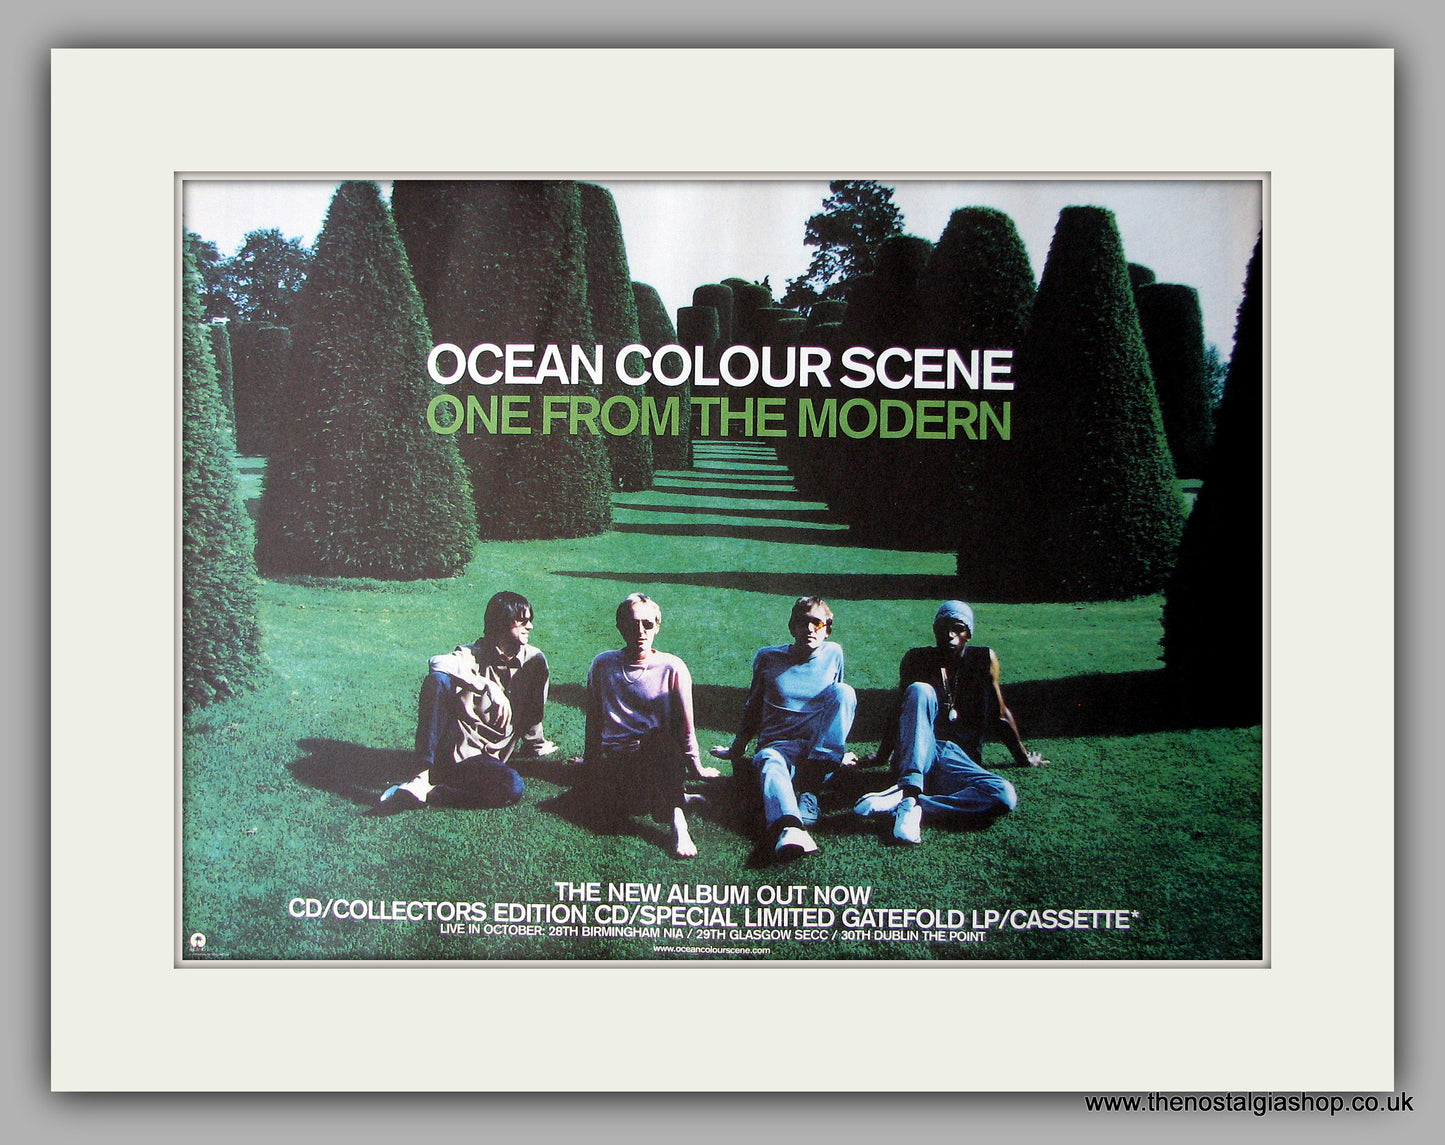 Ocean Colour Scene - One From The Modern. Original Vintage Advert 1999 (ref AD56097)